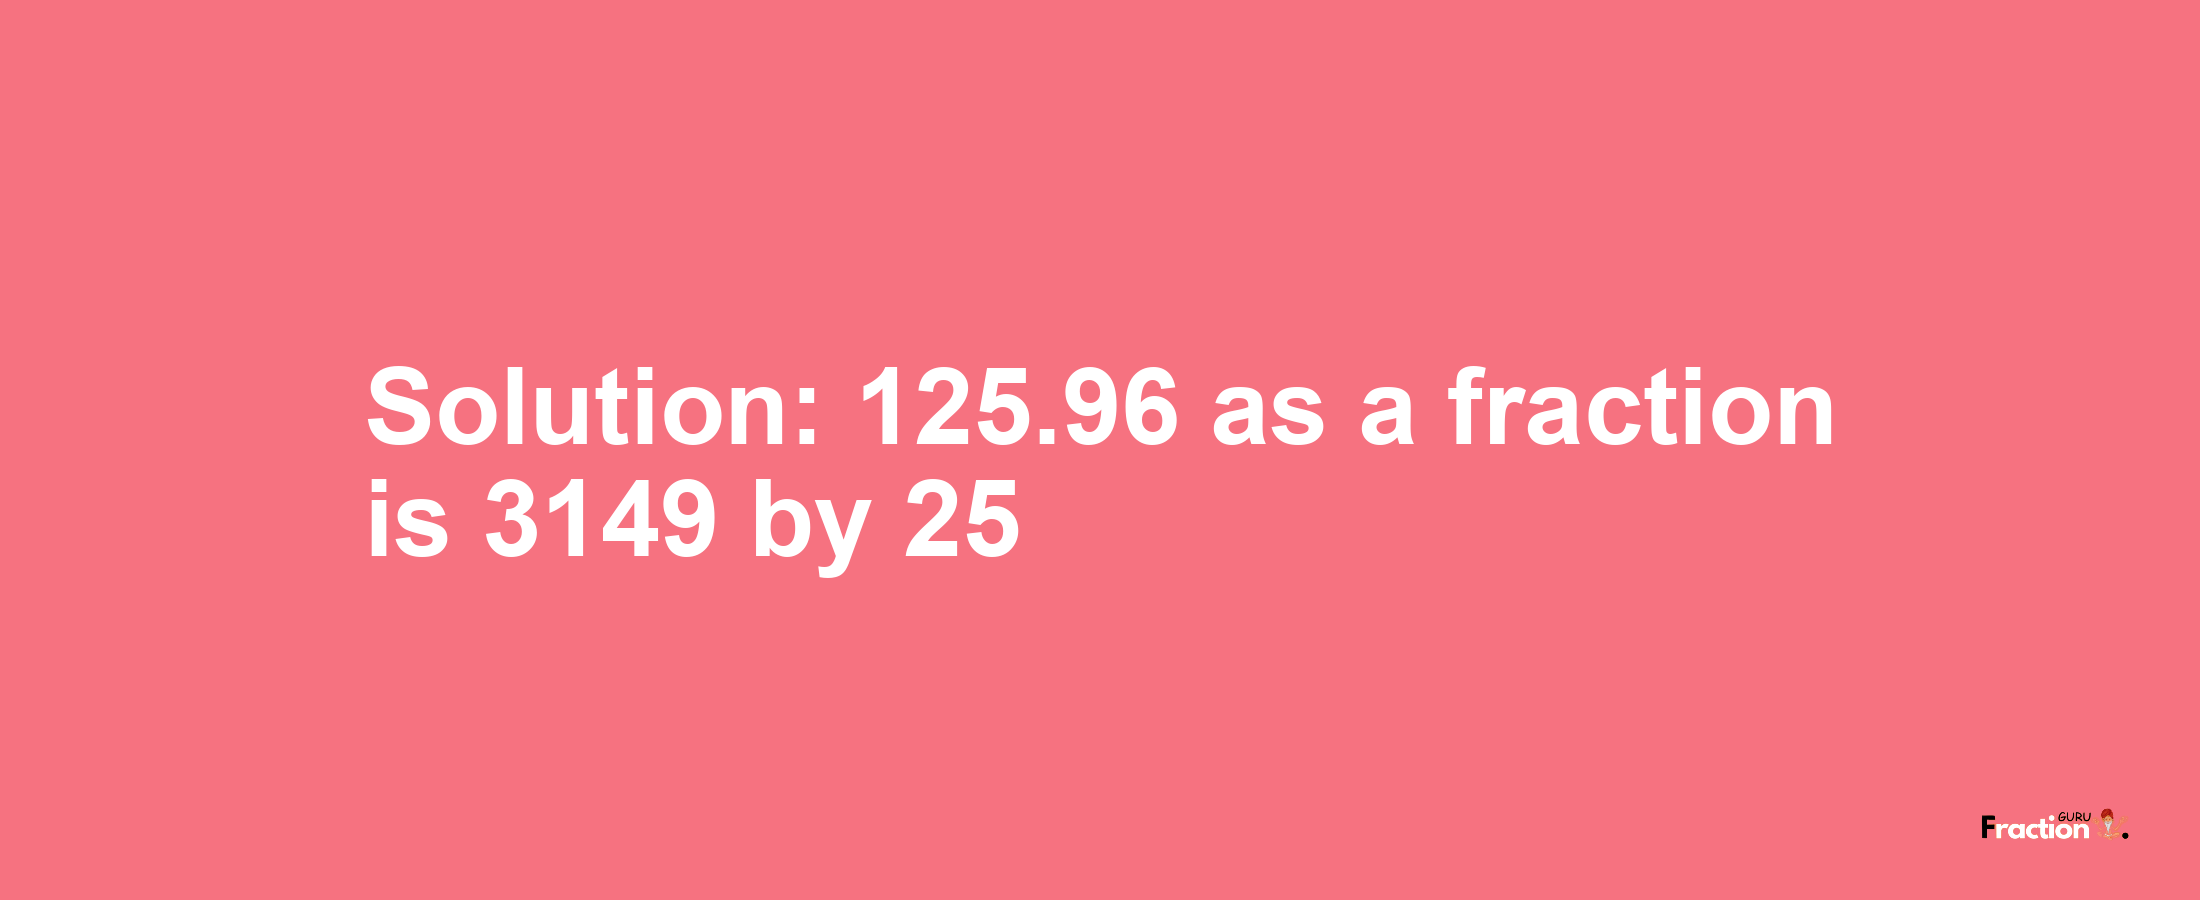 Solution:125.96 as a fraction is 3149/25